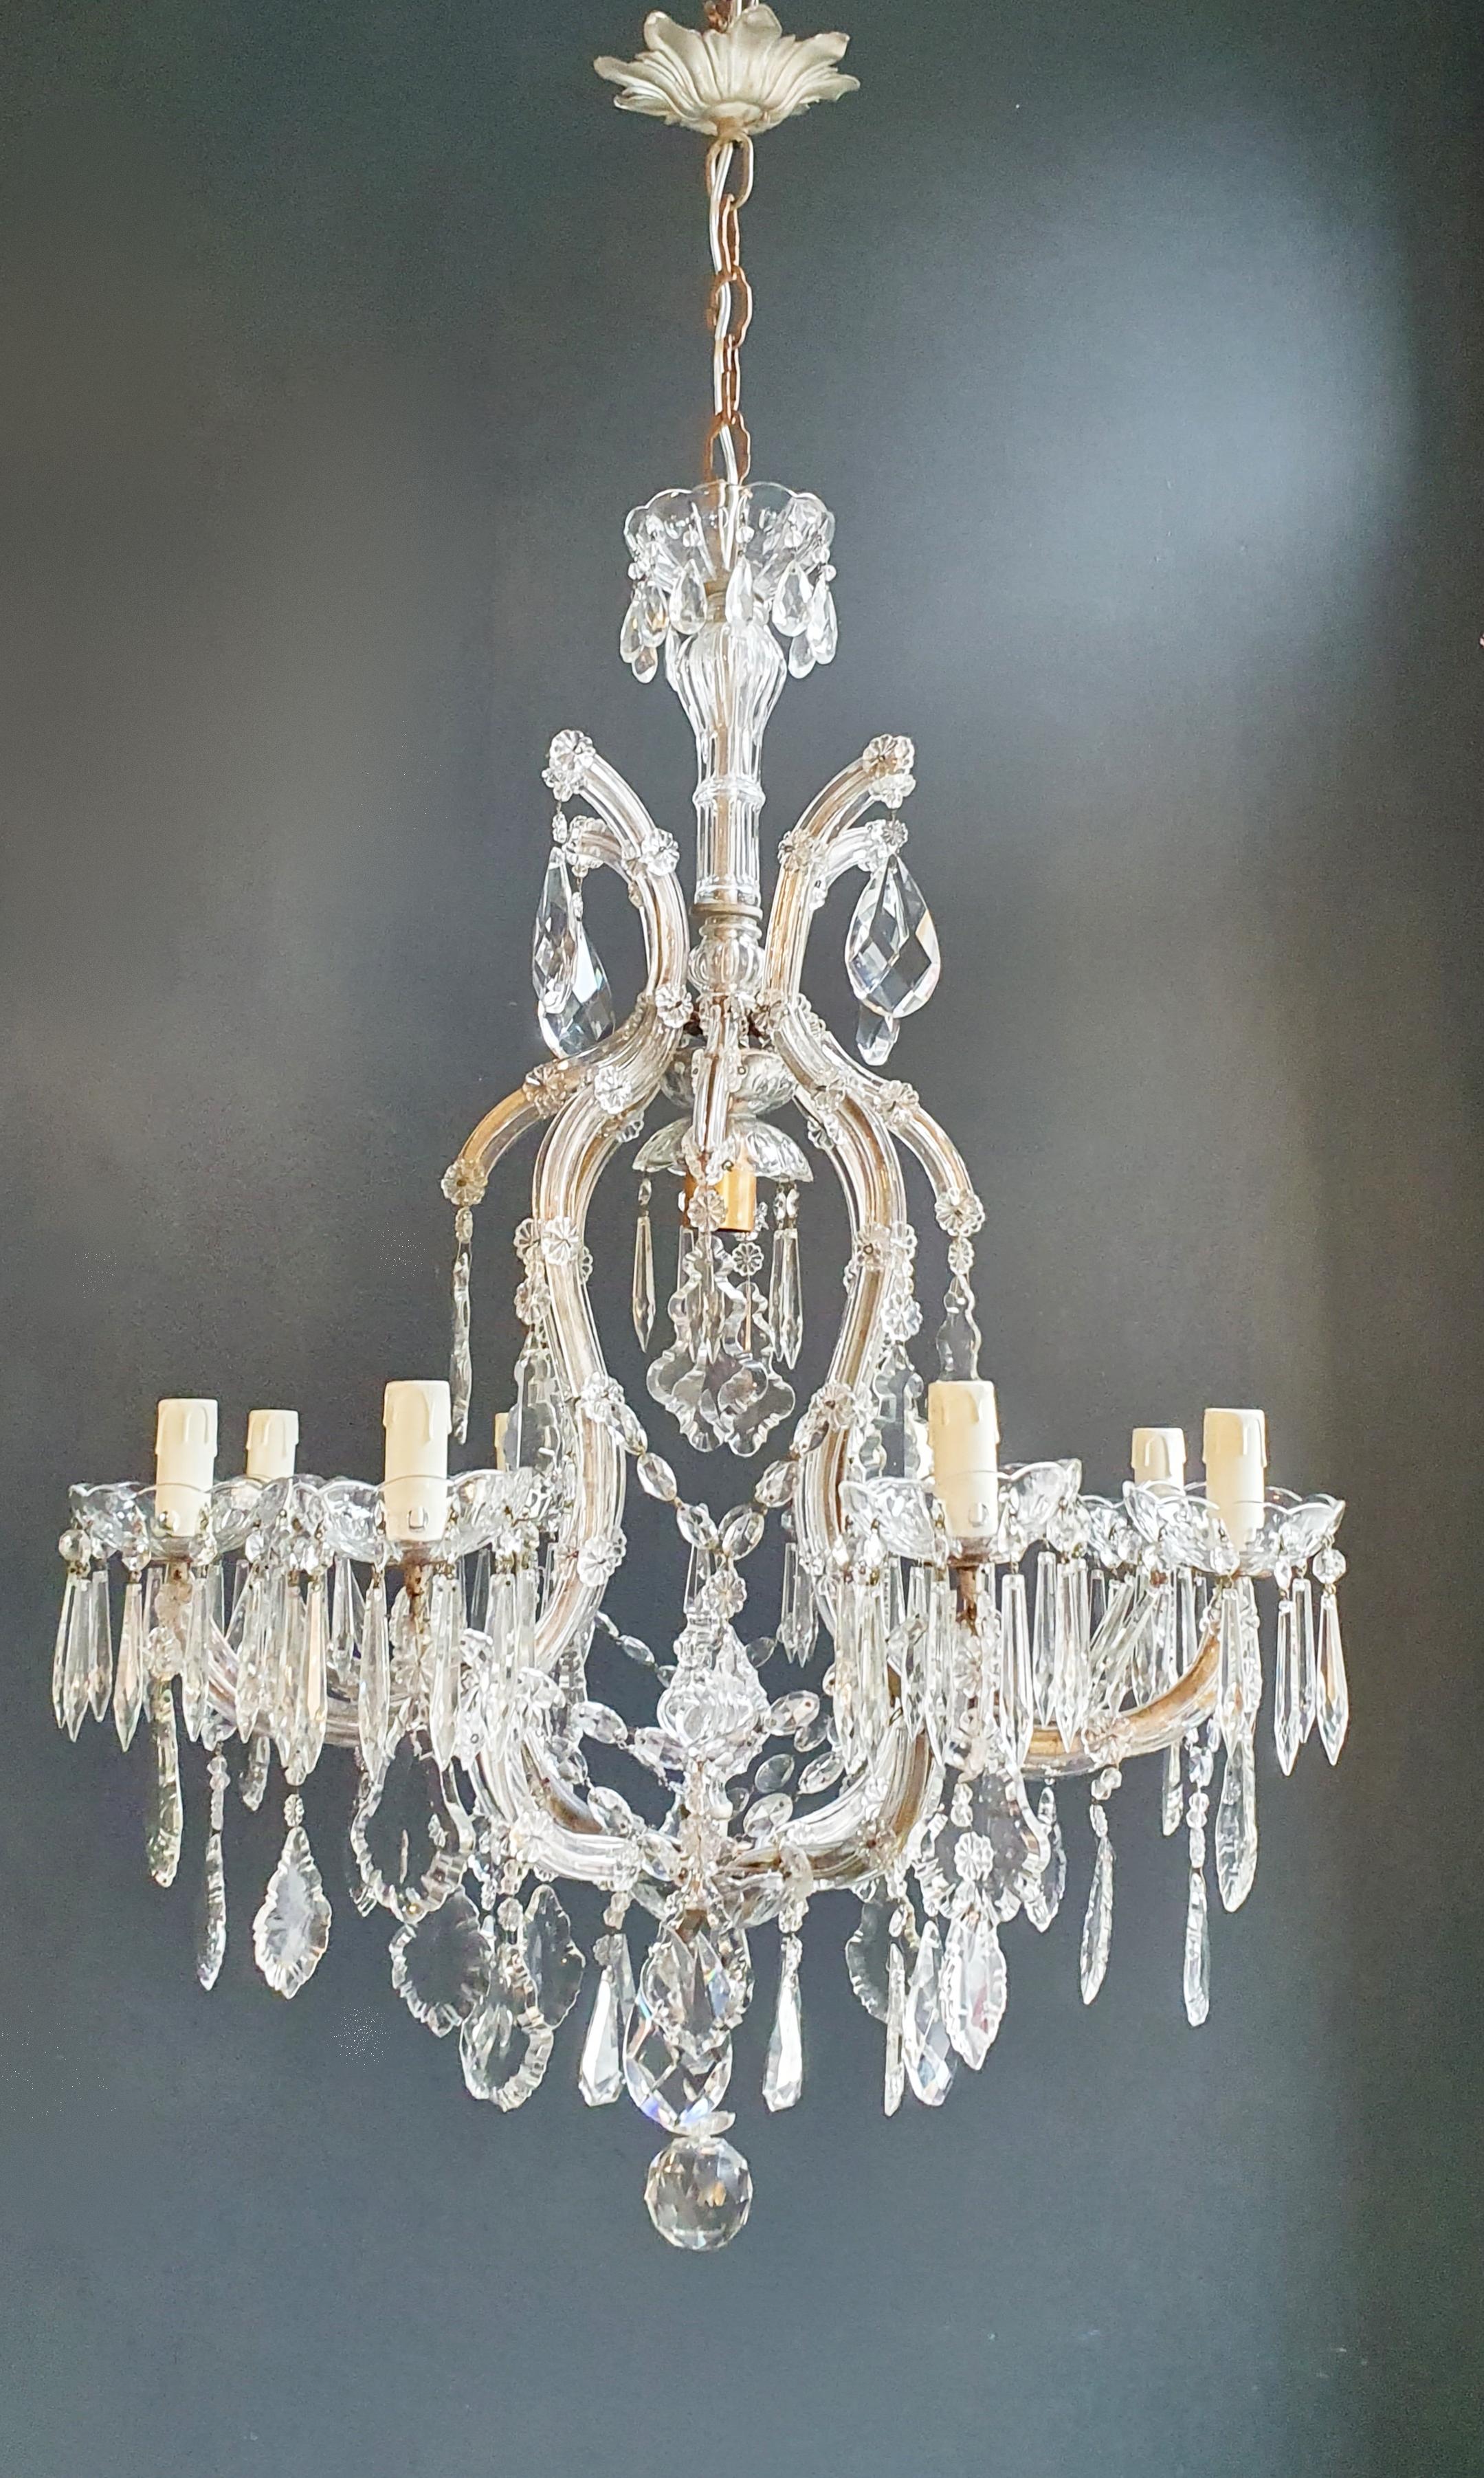 Baroque Maria Theresa Crystal Chandelier Antique Classic Clear Glass